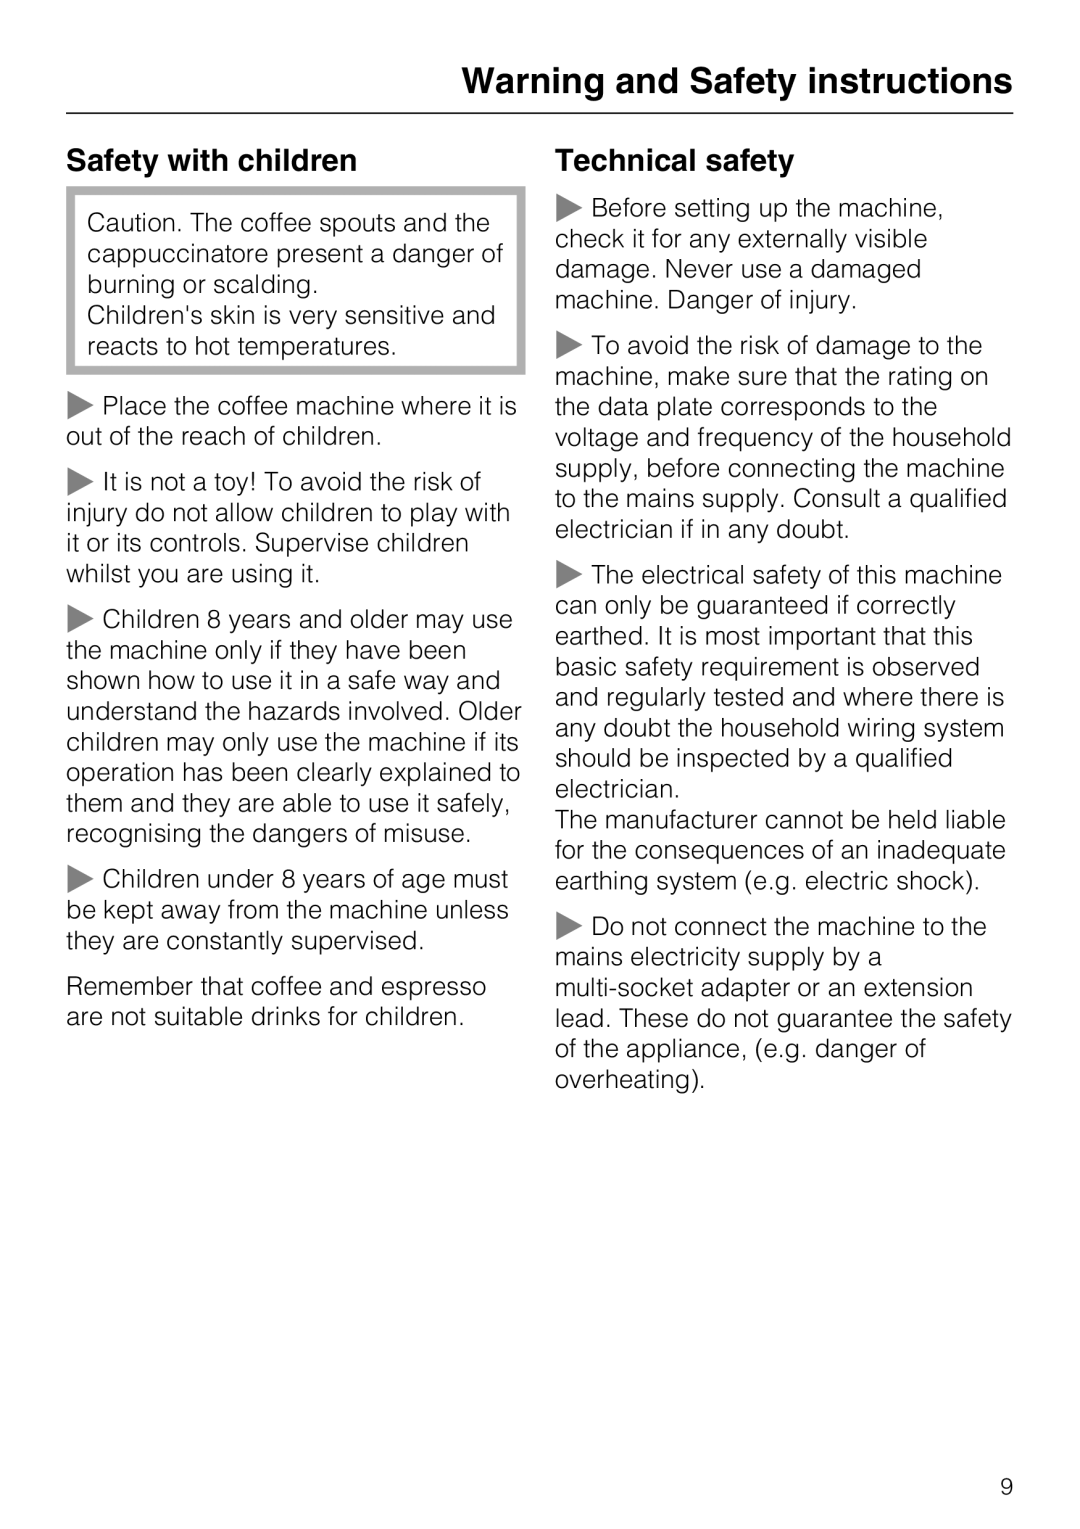 Miele CM 5100 manual Safety with children, Technical safety, Warning and Safety instructions 